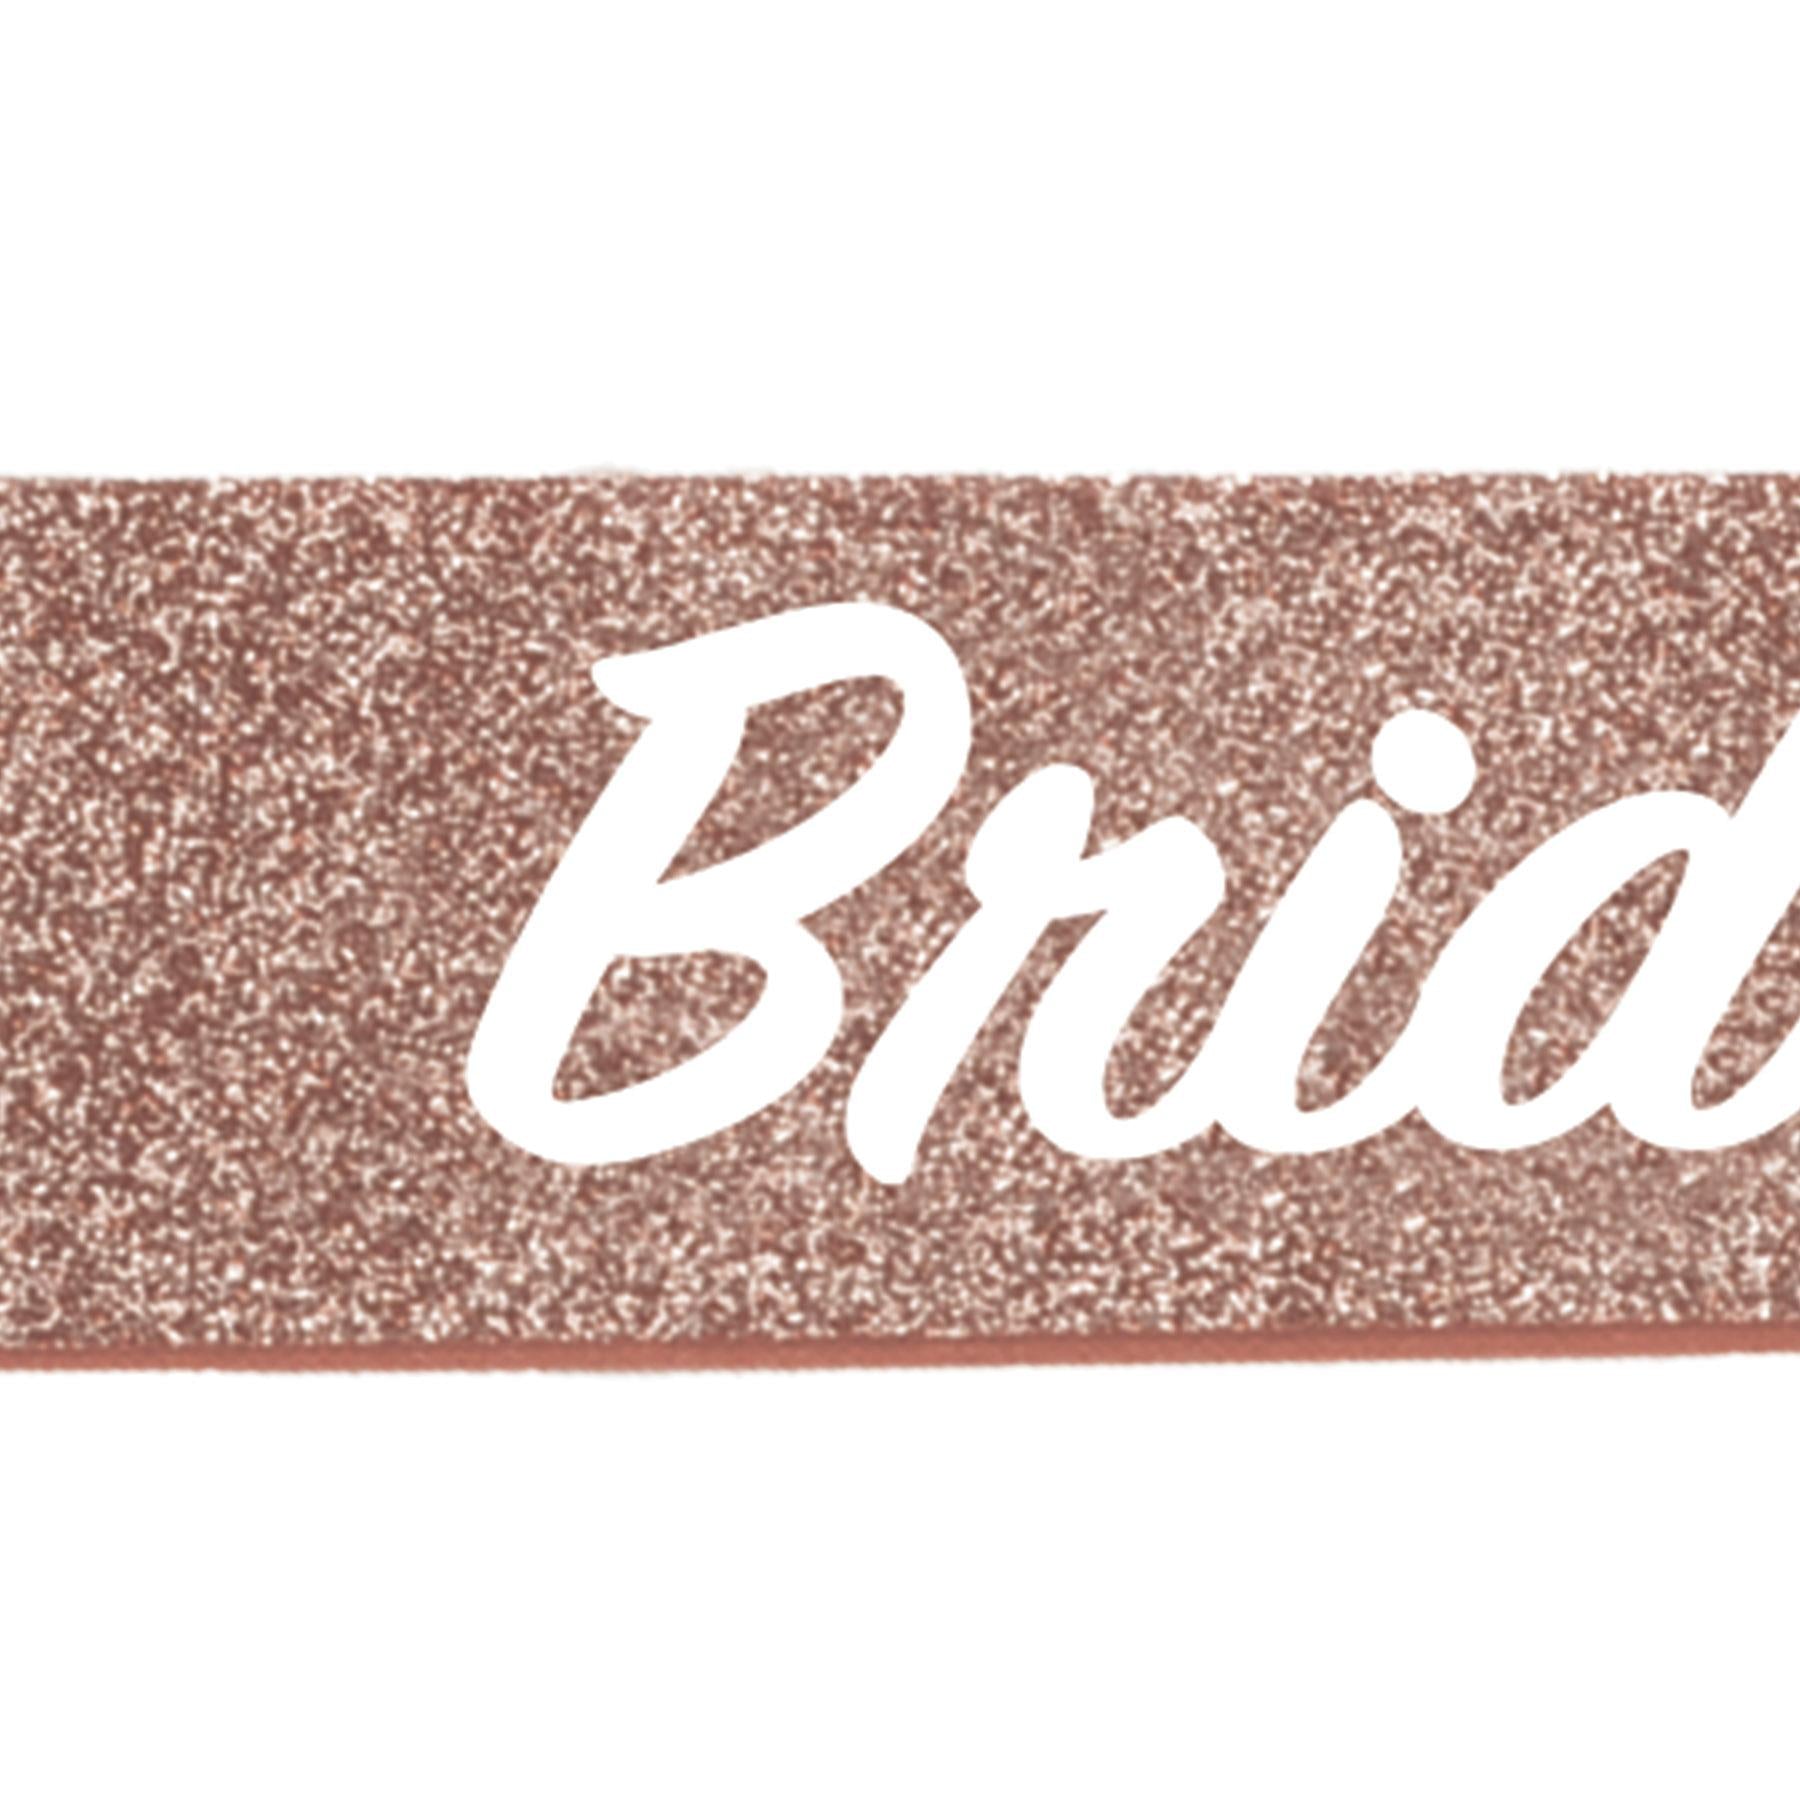 Bachelorette Party Bride To Be Glittered Sash (6 Packages)